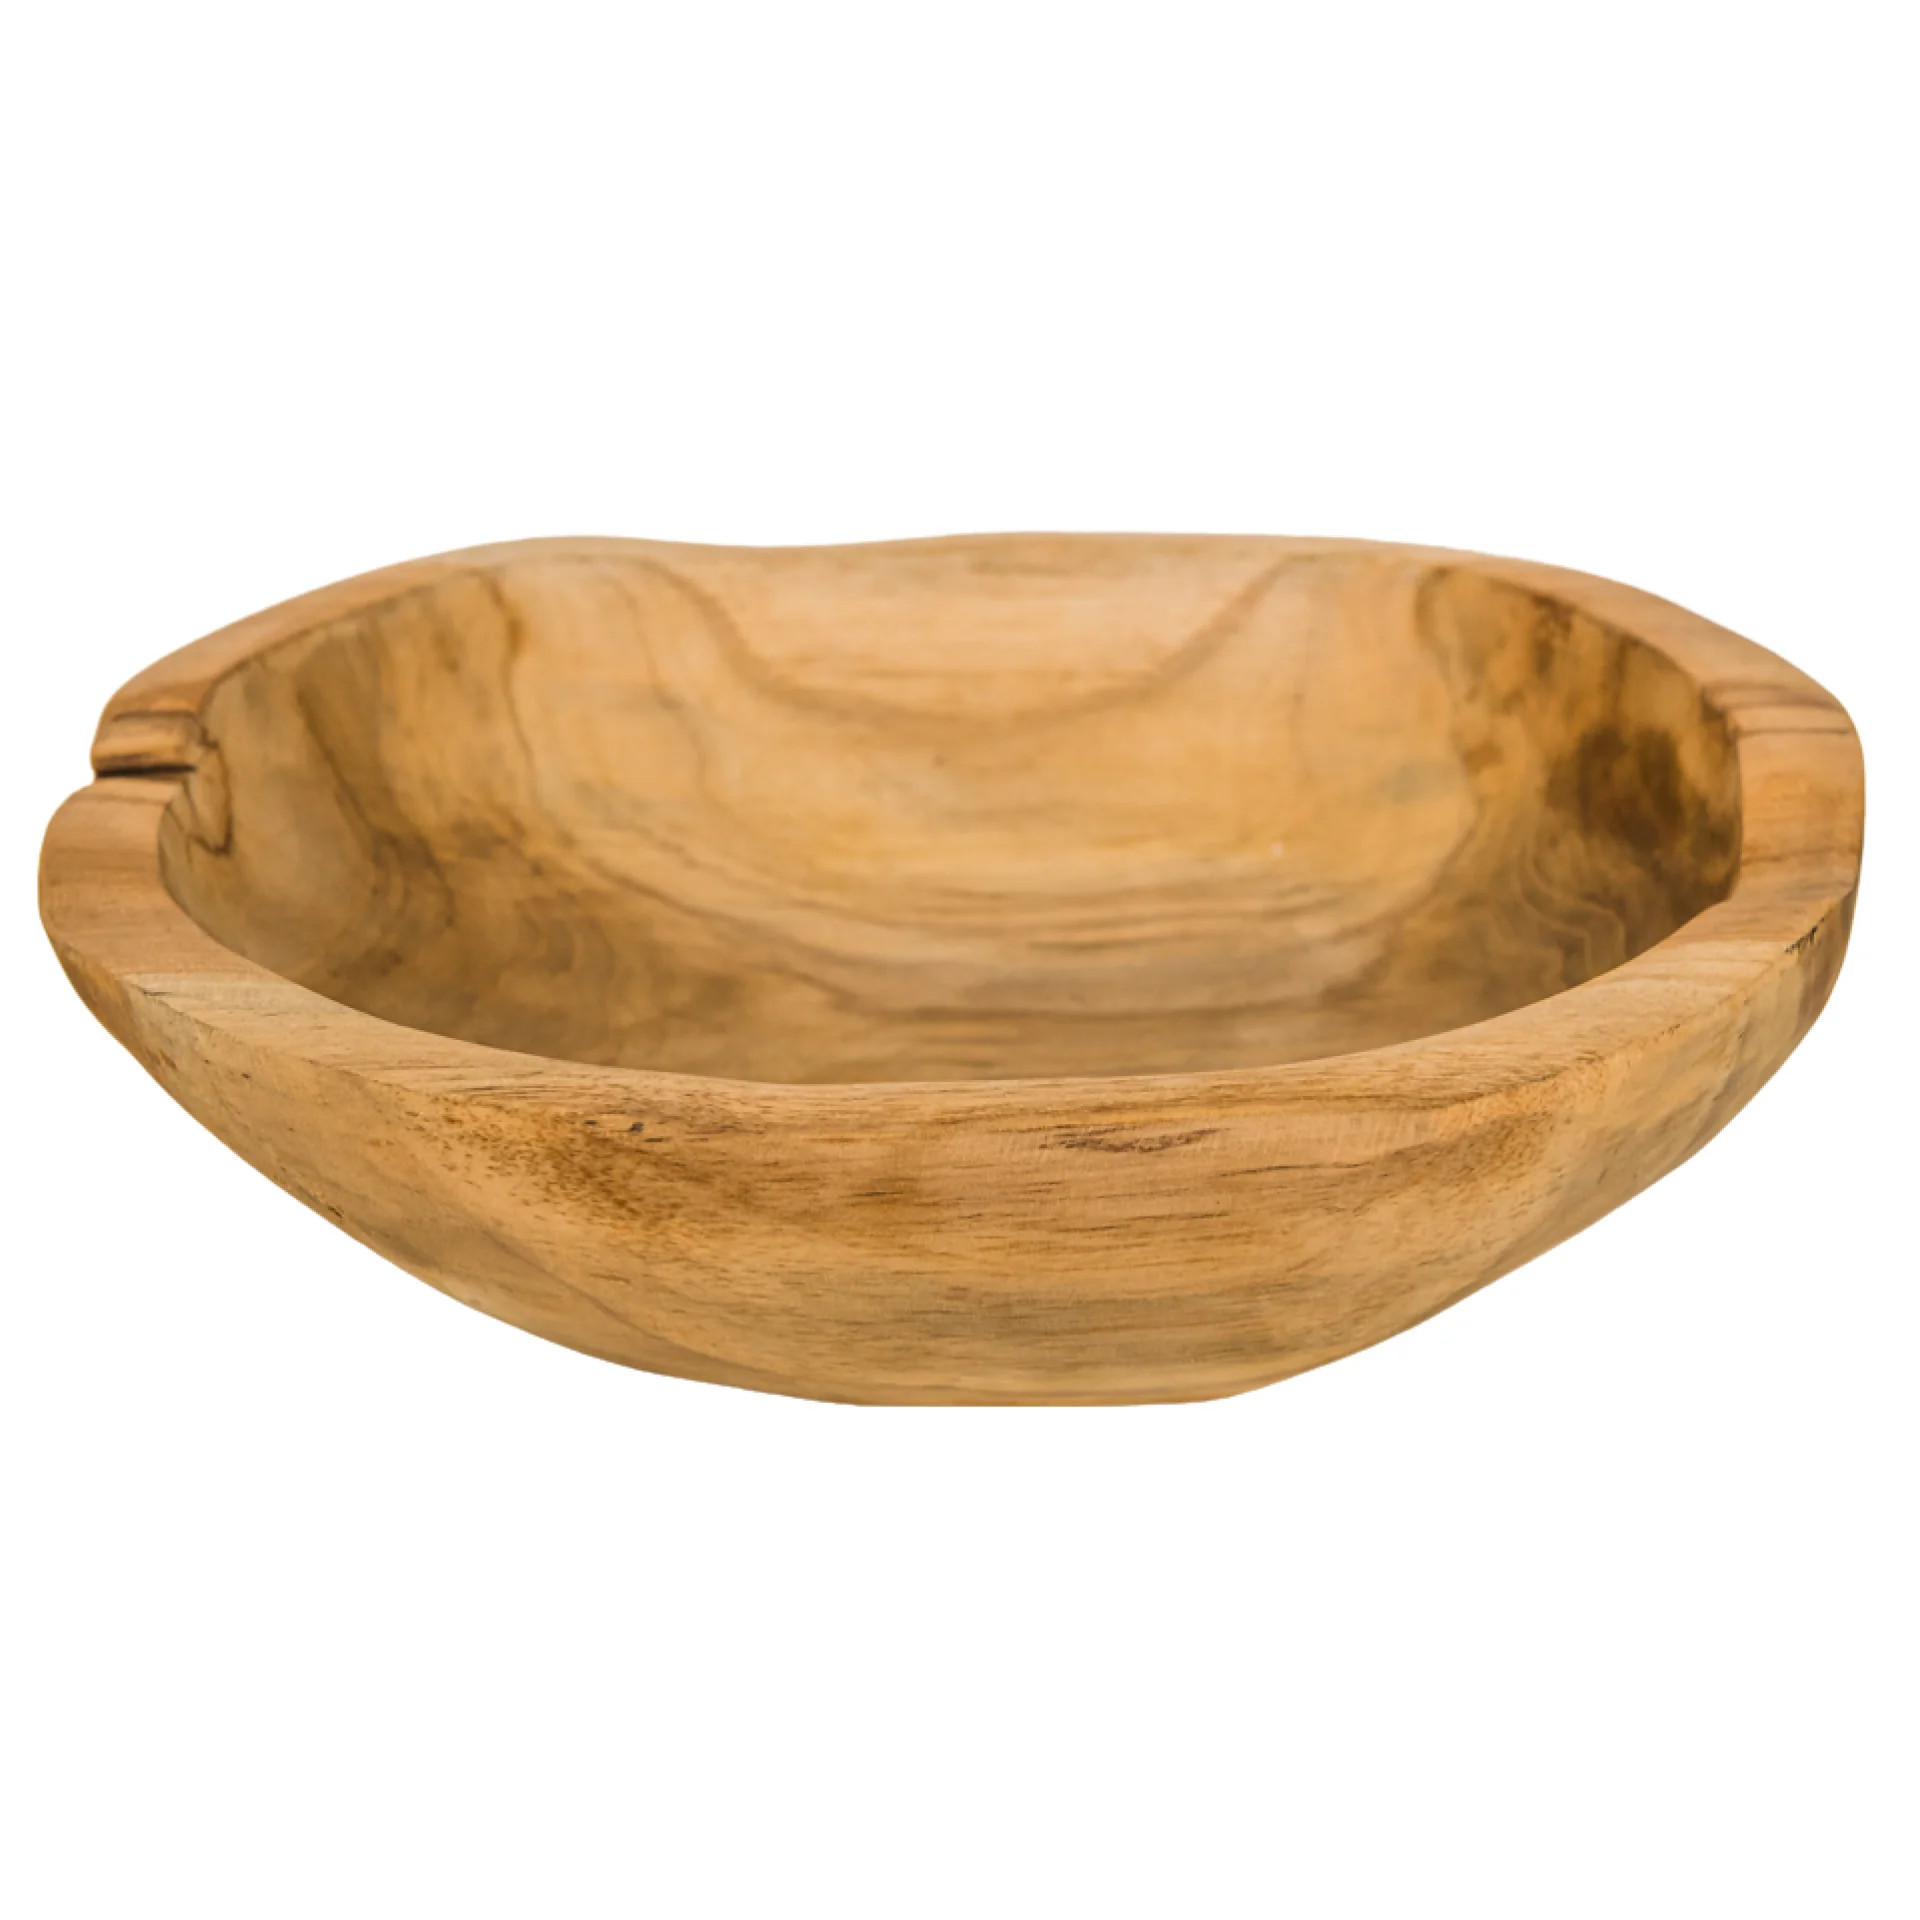 Carved teak Oval Bowl | Cove Home